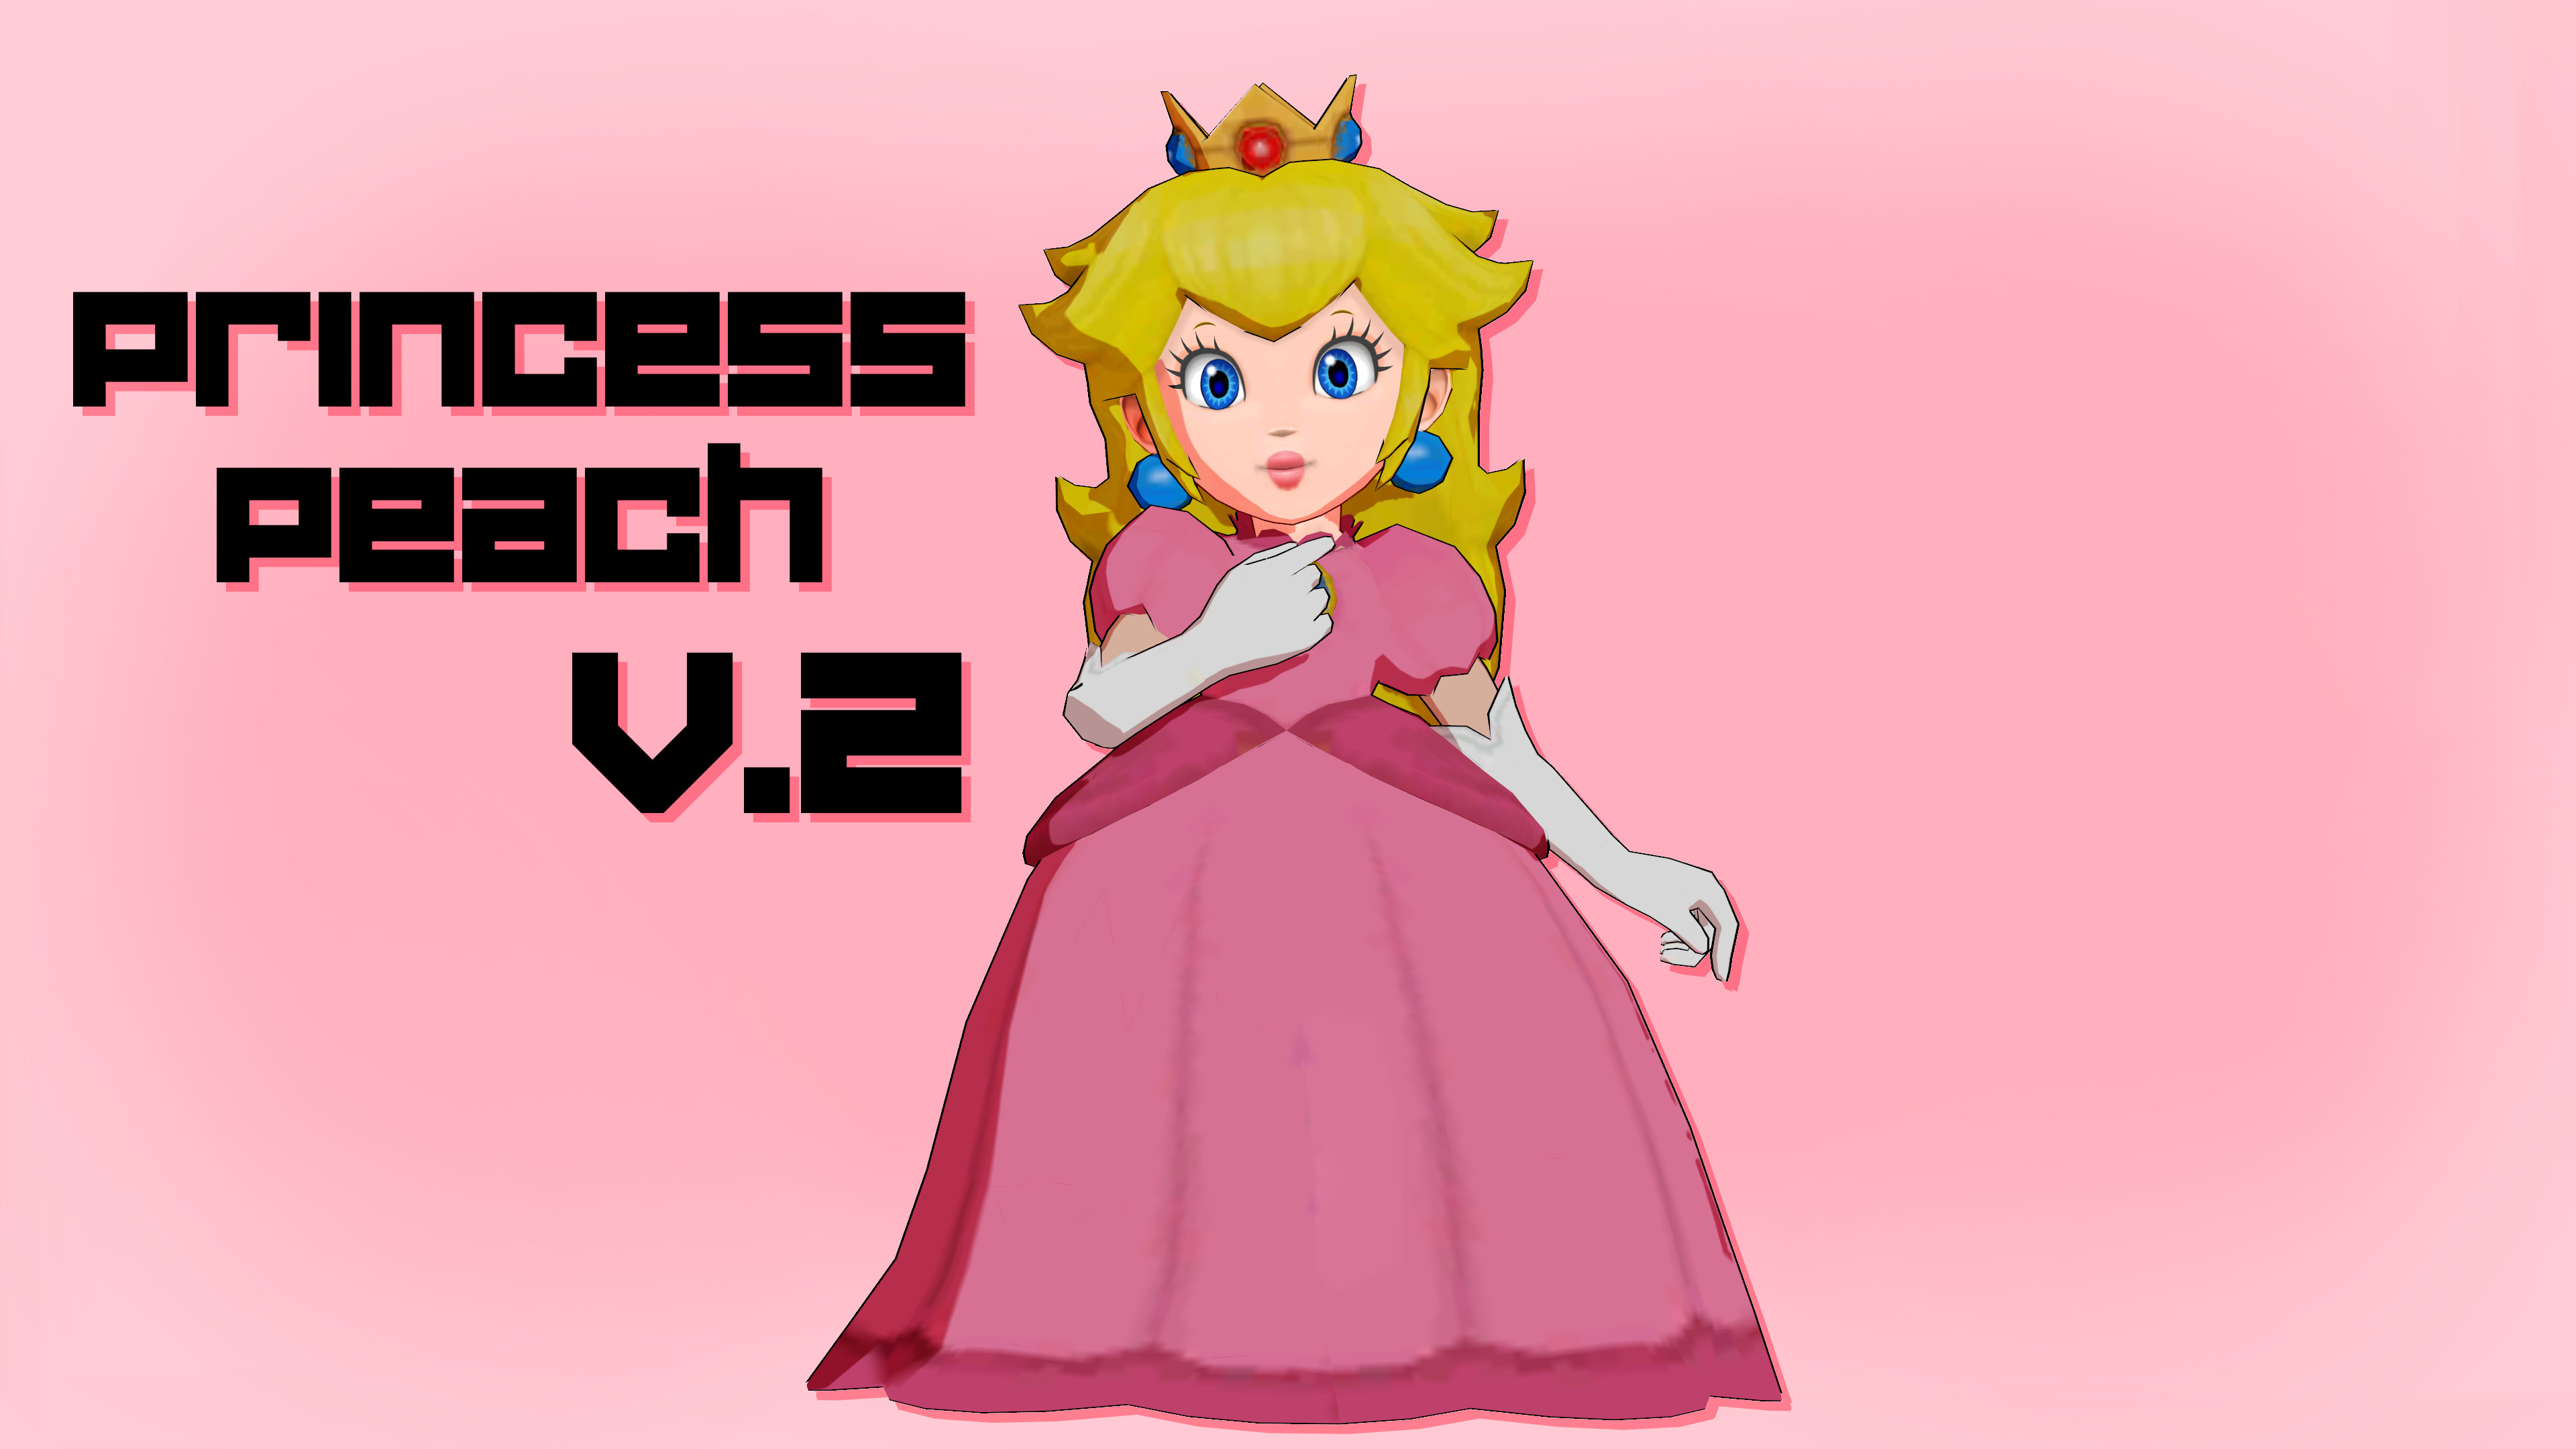 Princess Peach.exe is a mod for the popular video game Mario.
It introduces a new character, Princess Peach, as a playable character in the game.